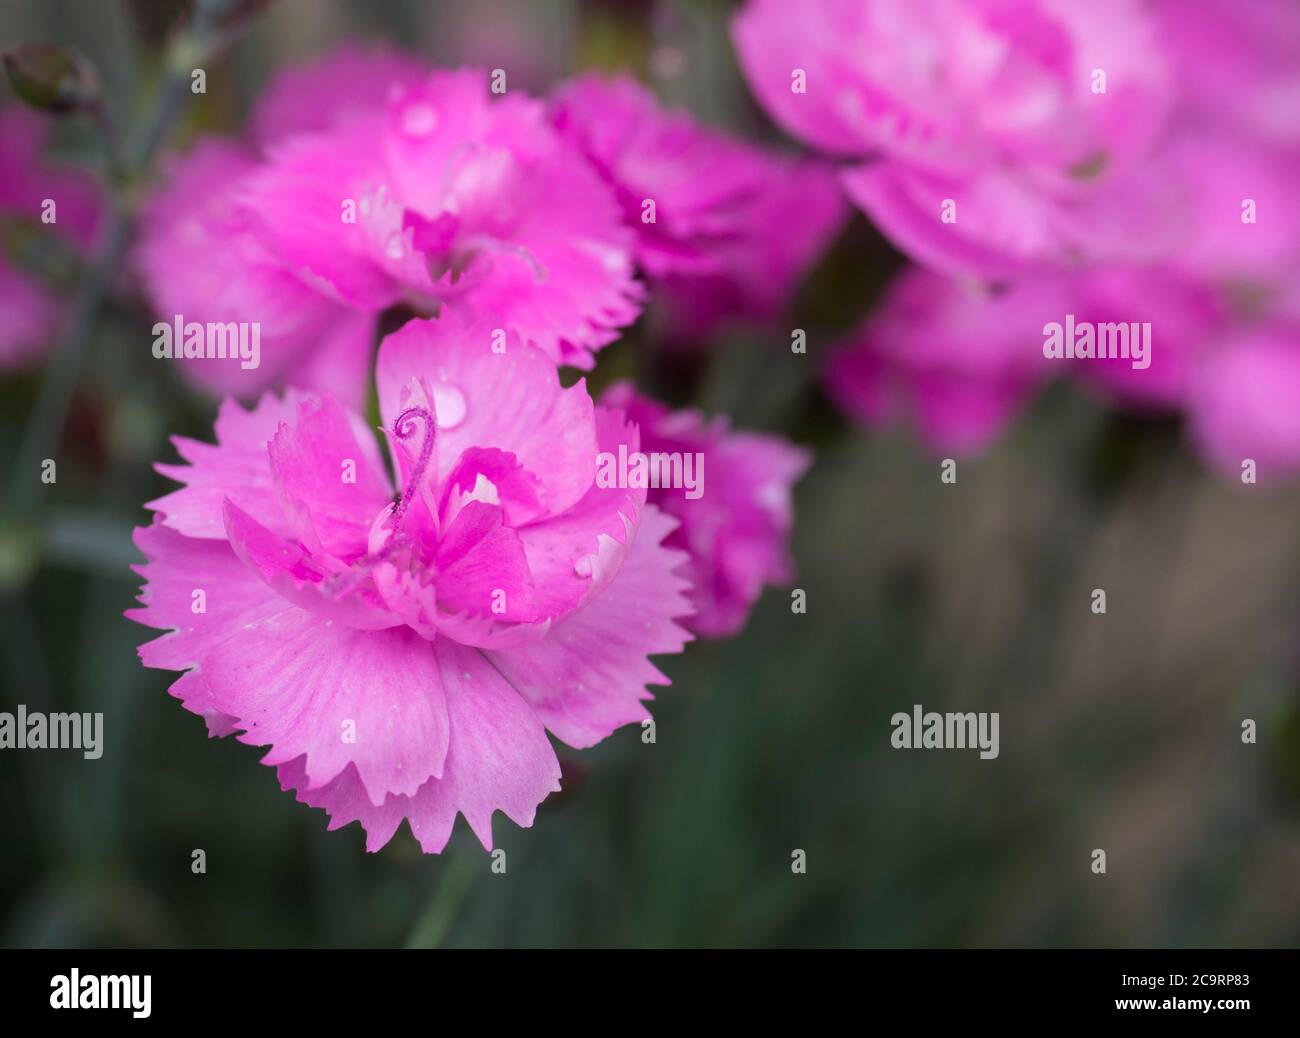 Close-up blooming carnation glory flower Dianthus caryophyllus, clove pink, species of Dianthus deltoides, vibrant color bokeh floral background Stock Photo